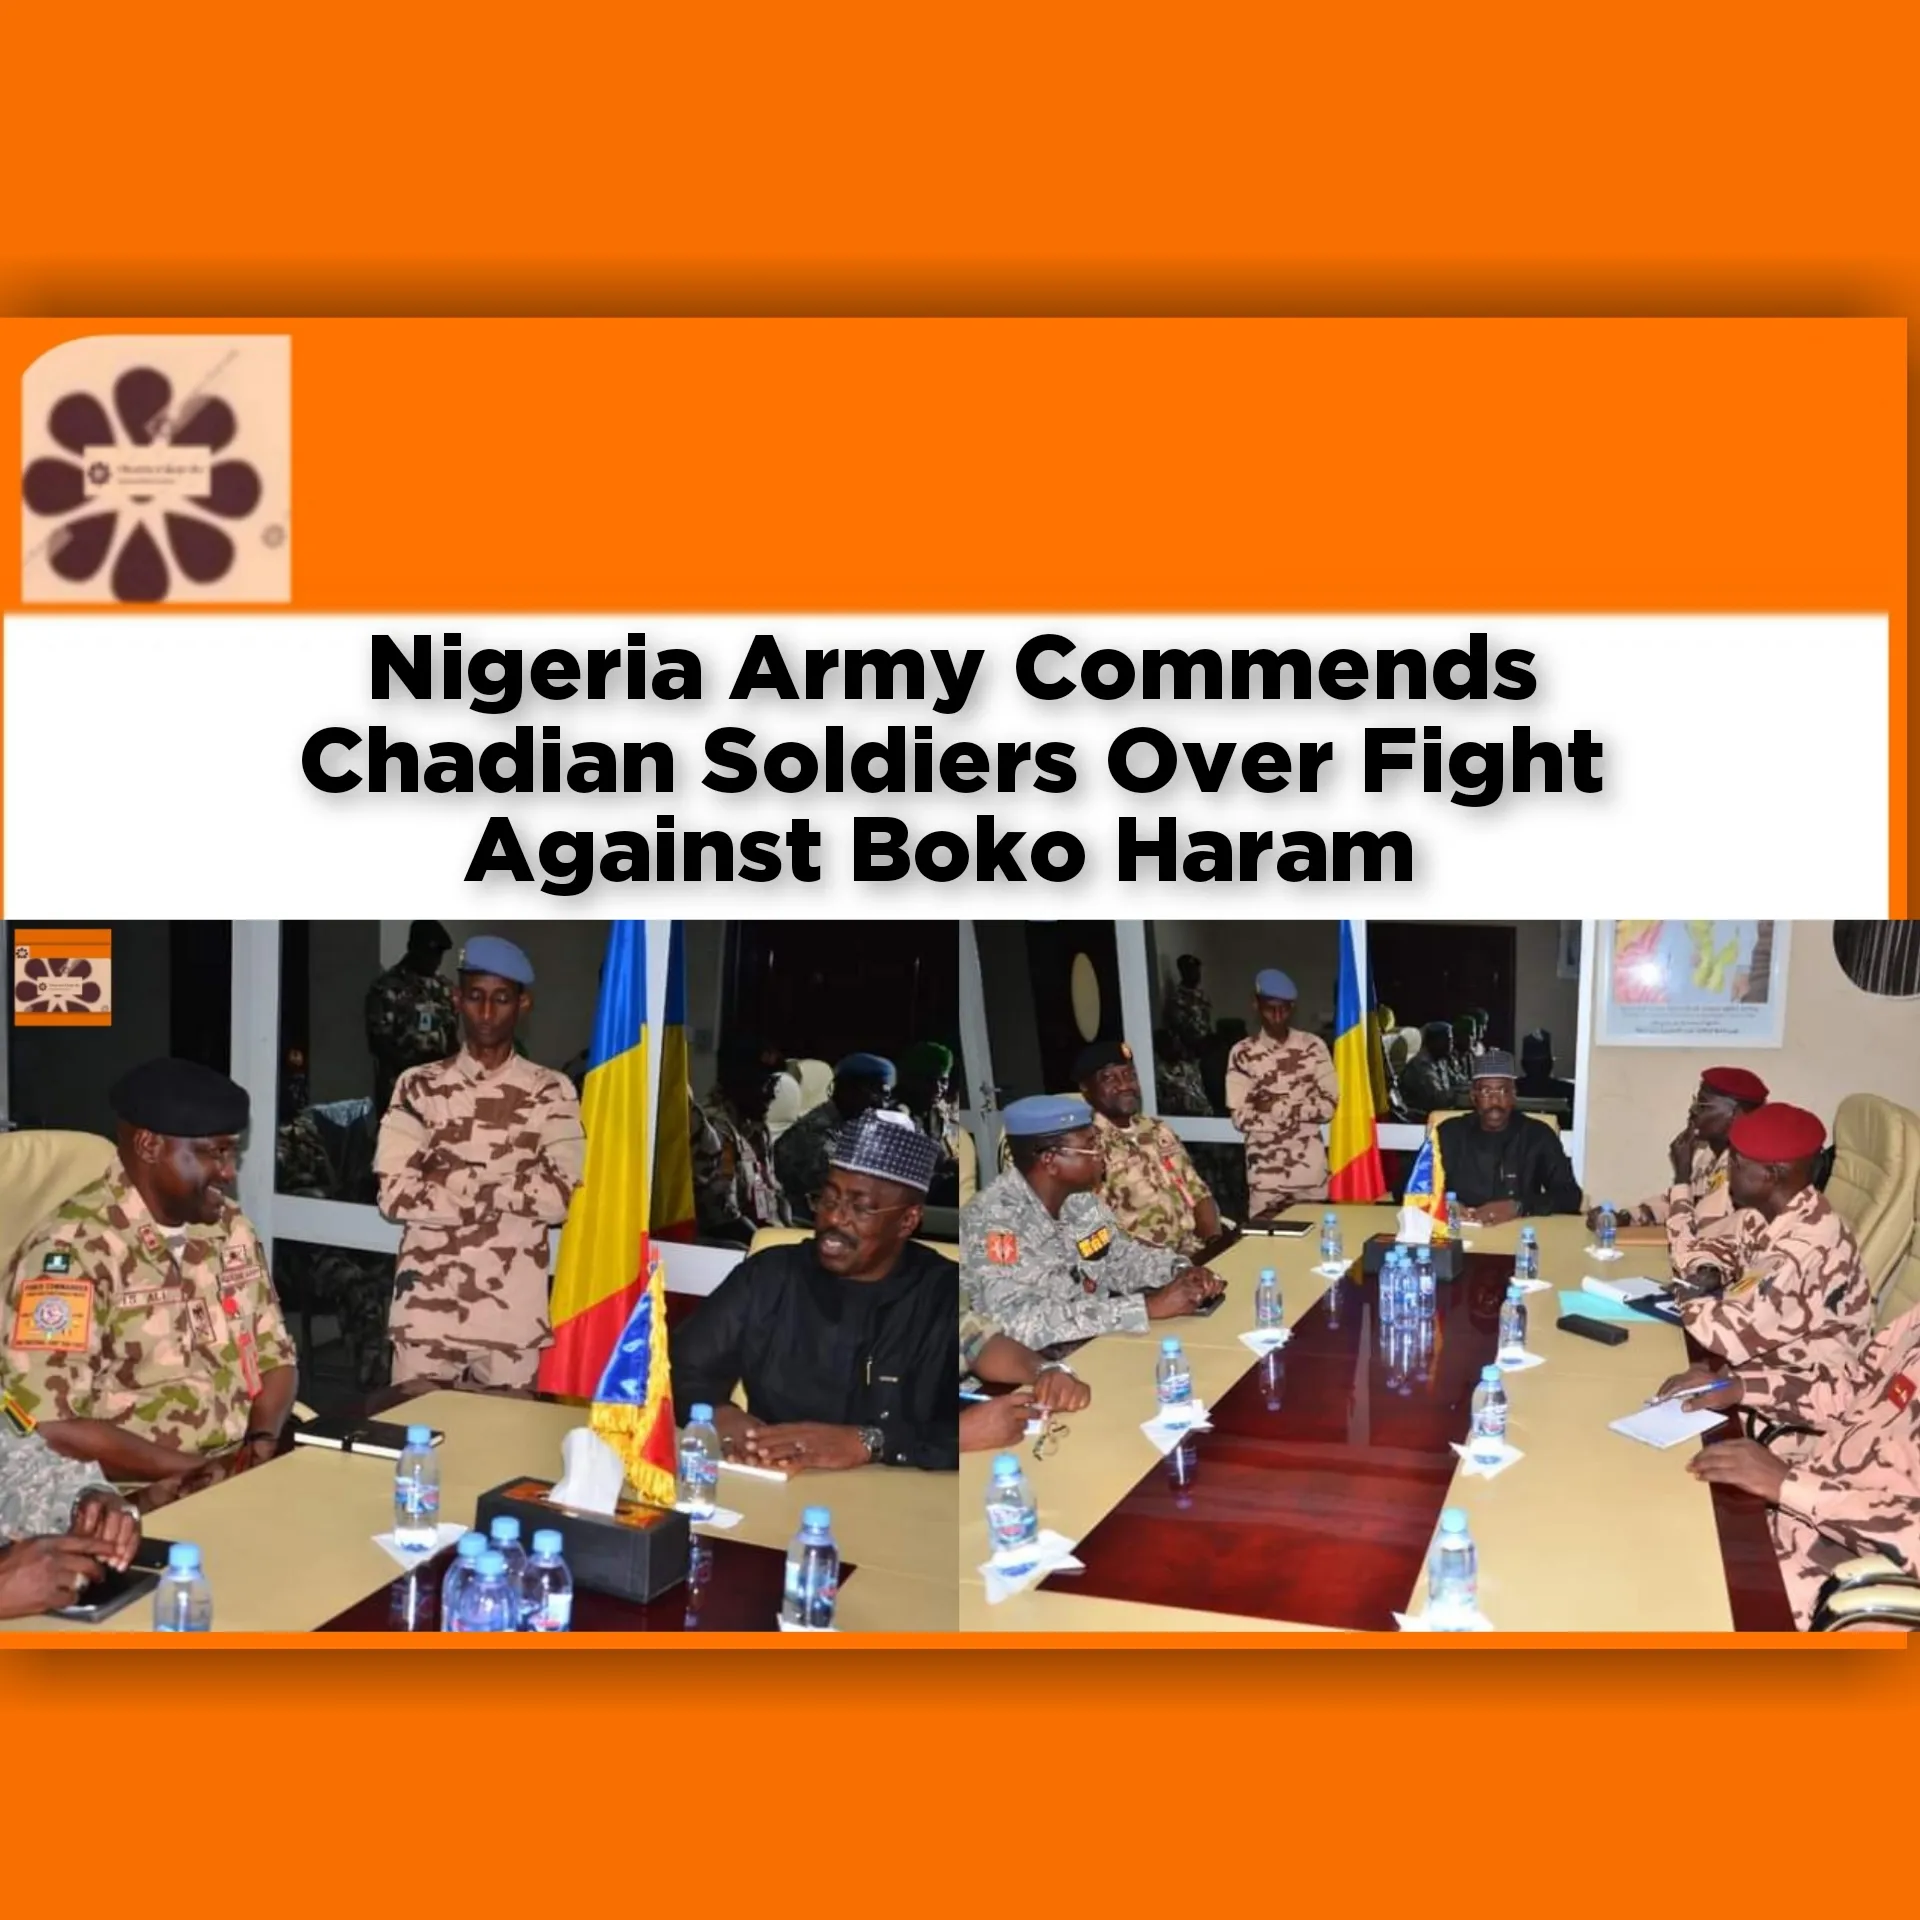 Nigeria Army Commends Chadian Soldiers Over Fight Against Boko Haram ~ OsazuwaAkonedo #BokoHaram #army #Chad #Nigeria #soldiers